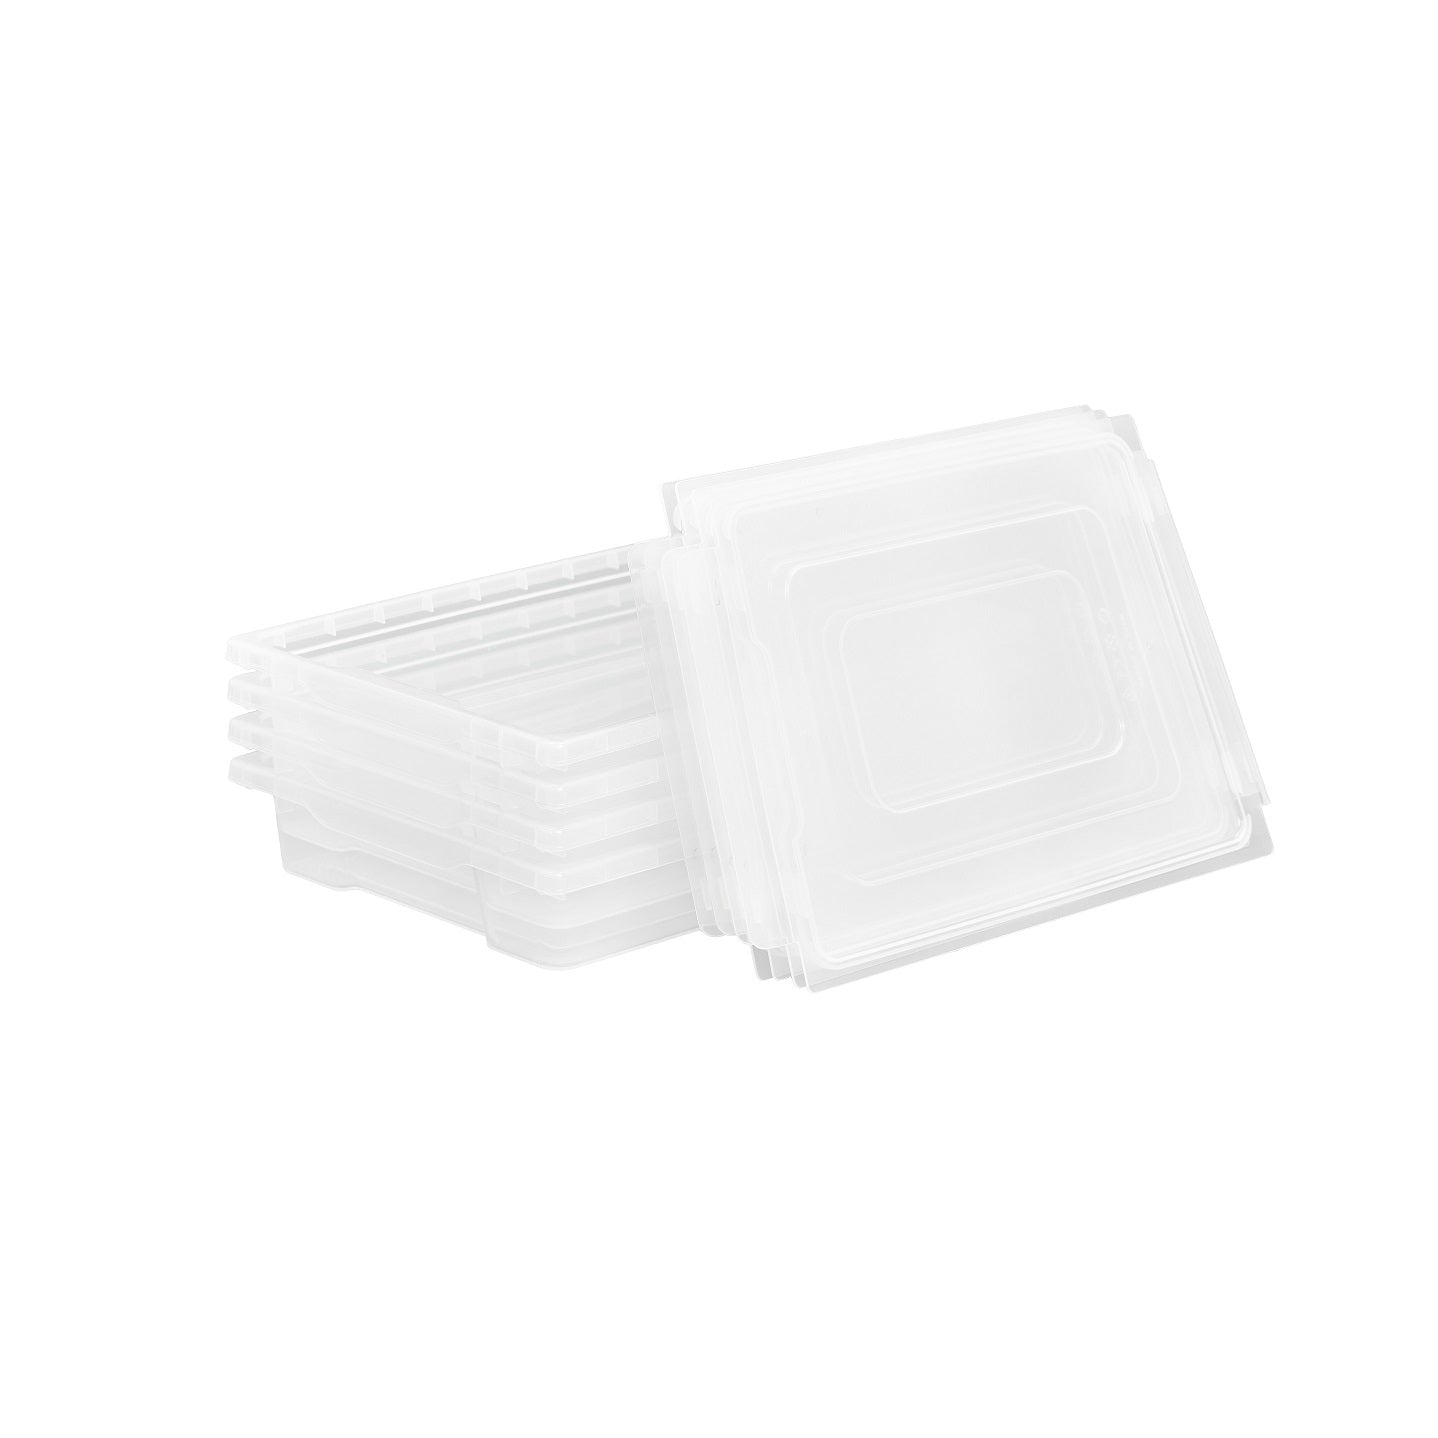 UNiPLAY Kids Small Tray with Lid (4PK) - Clear (#8324C)